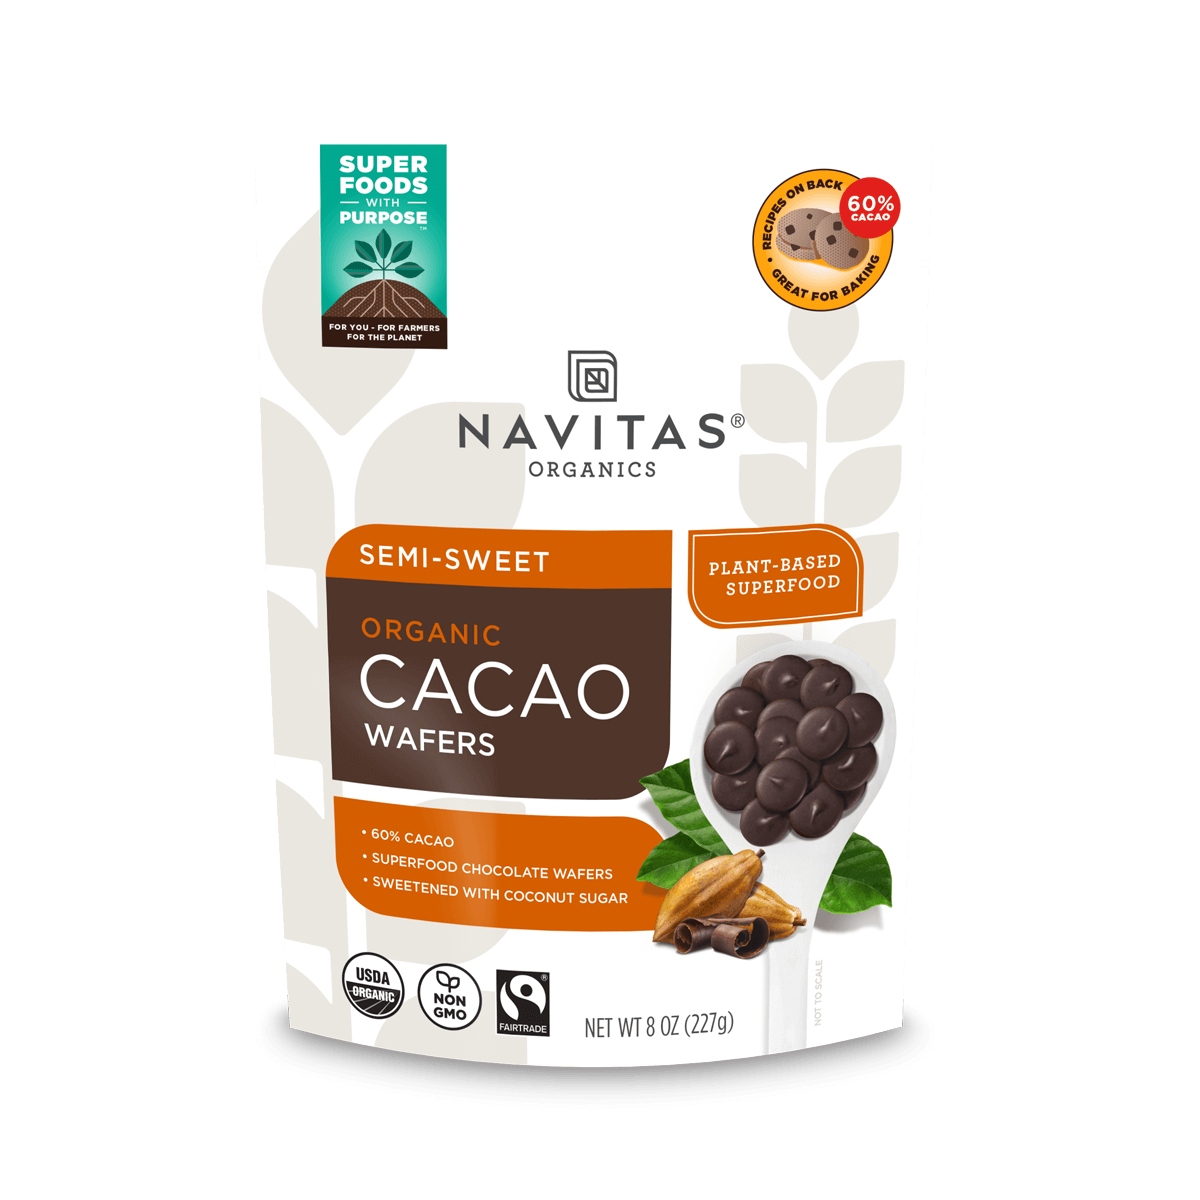 Navitas Organics Semi-sweet Cacao Wafers 60% Cacao 8oz. front of bag.